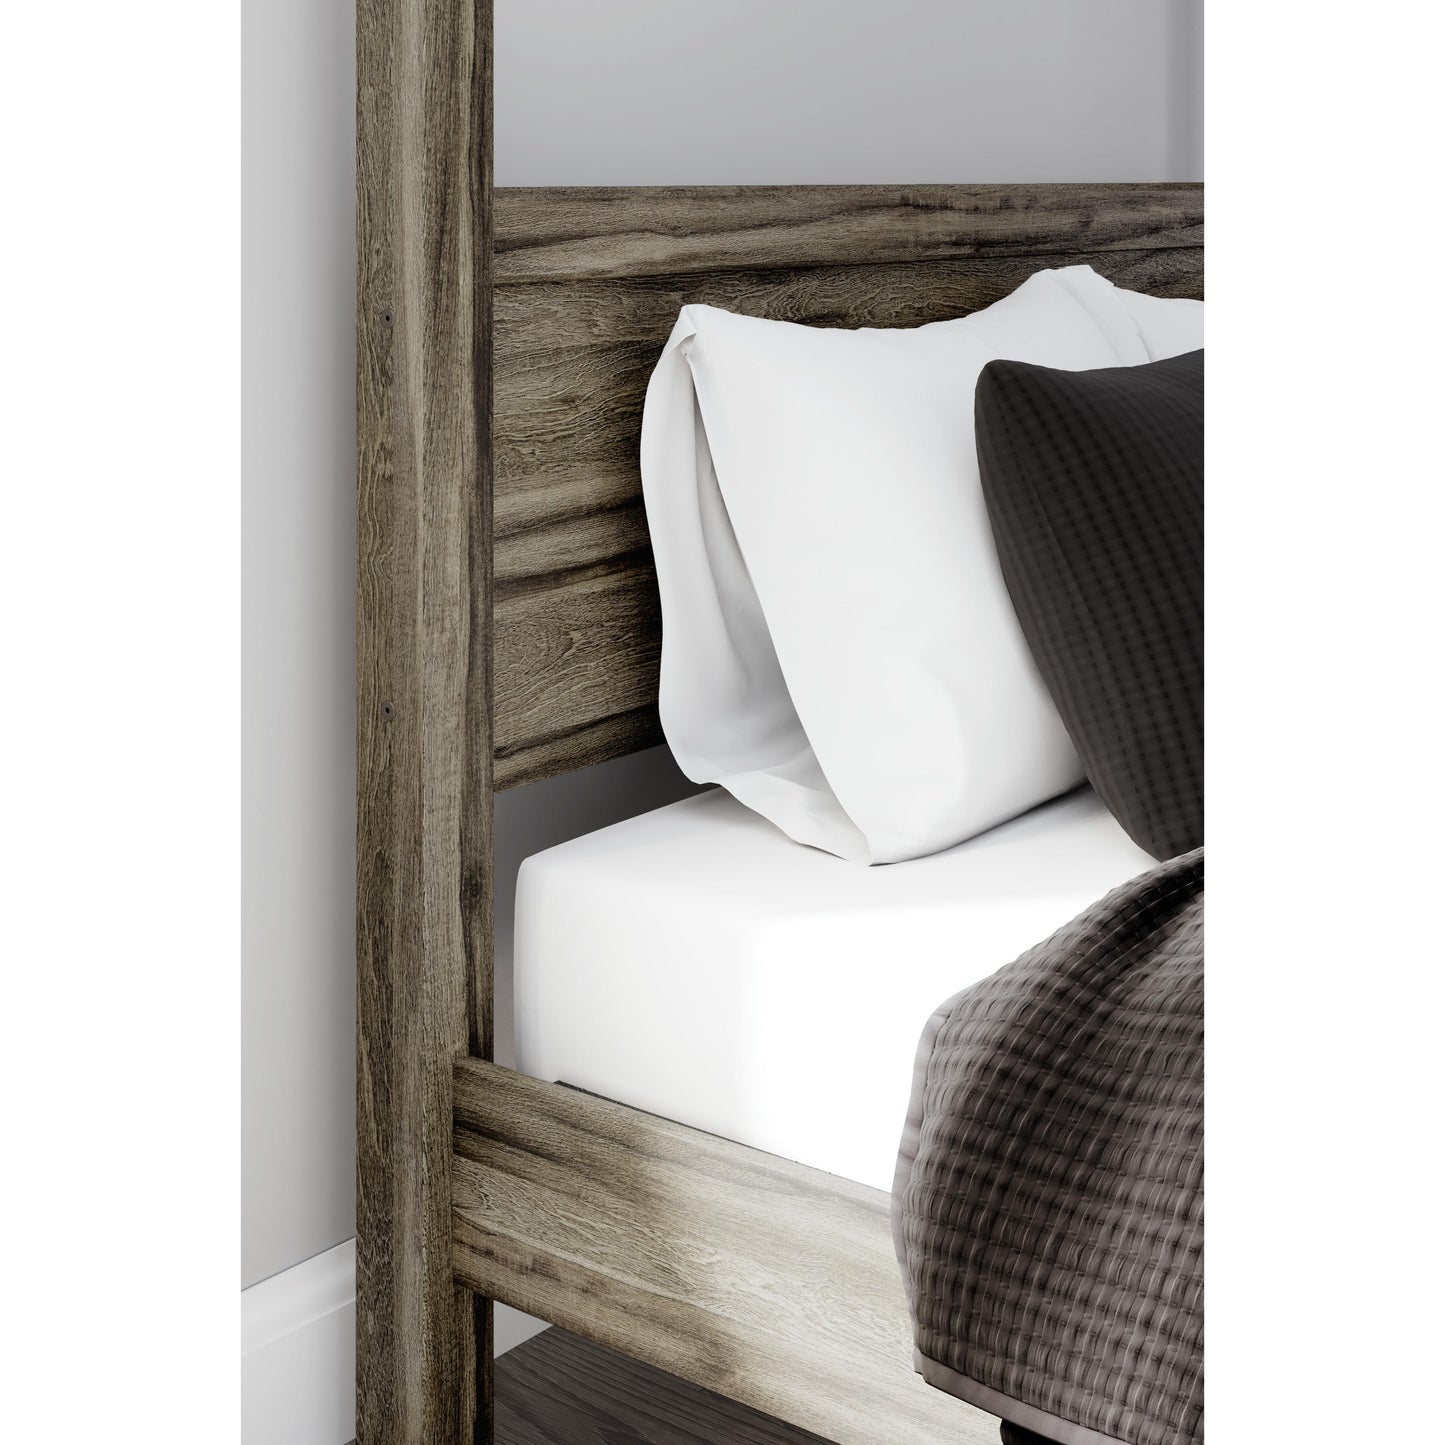 Signature Design by Ashley Shallifer Queen Canopy Bed EB1104-171/EB1104-161/EB1104-198 IMAGE 6